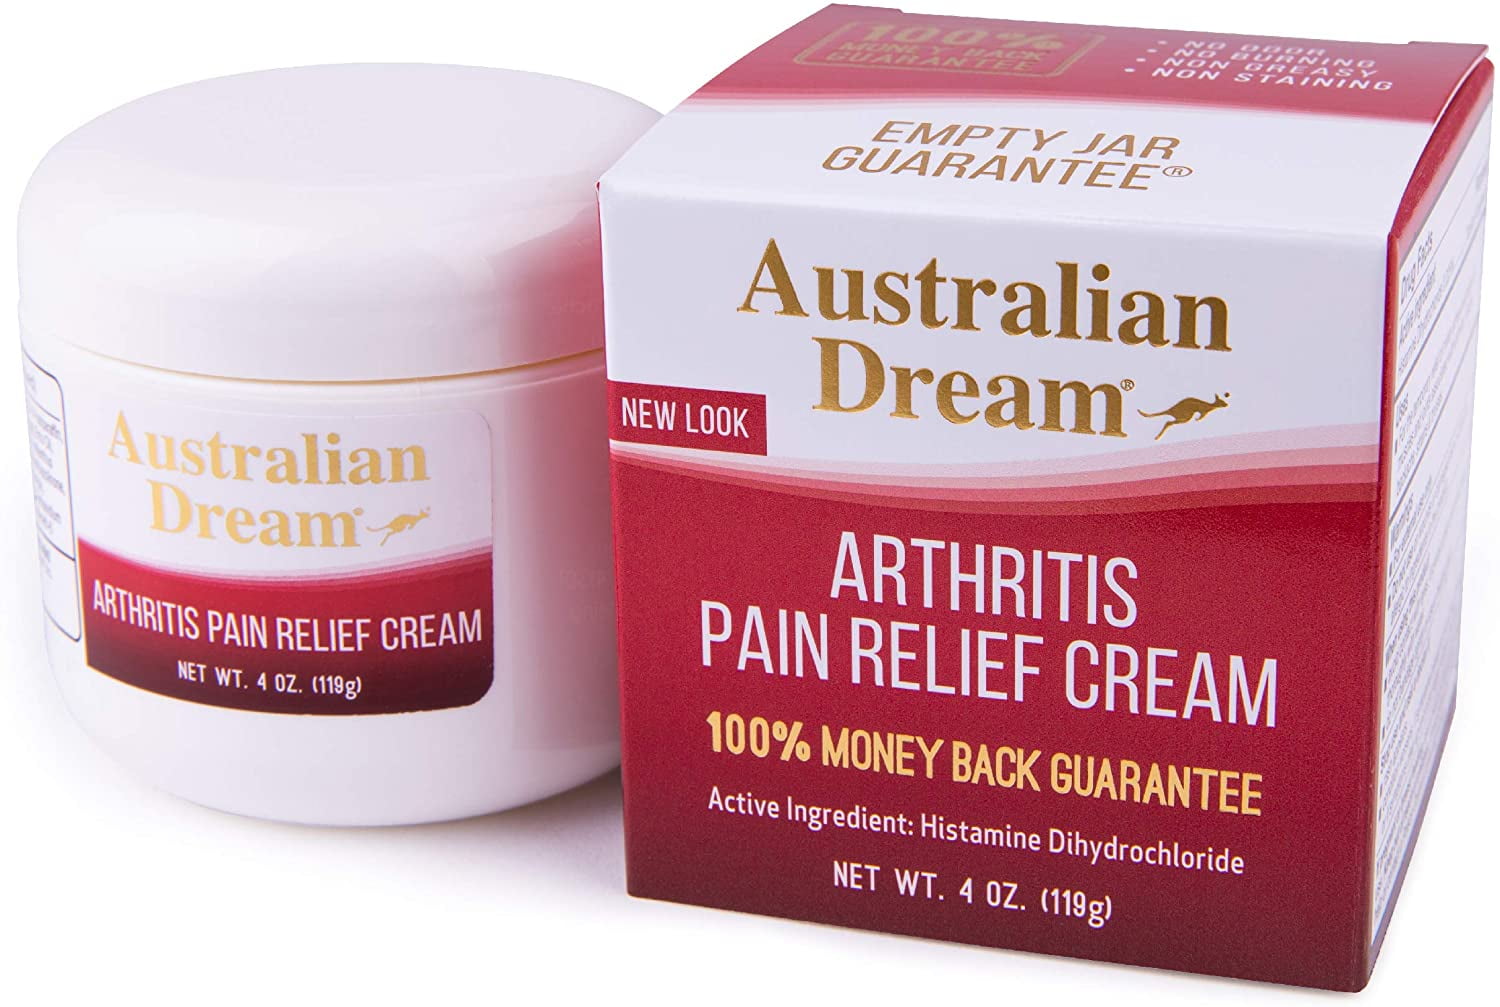 A&D ointment – Dream Crystal Gifts Inc.